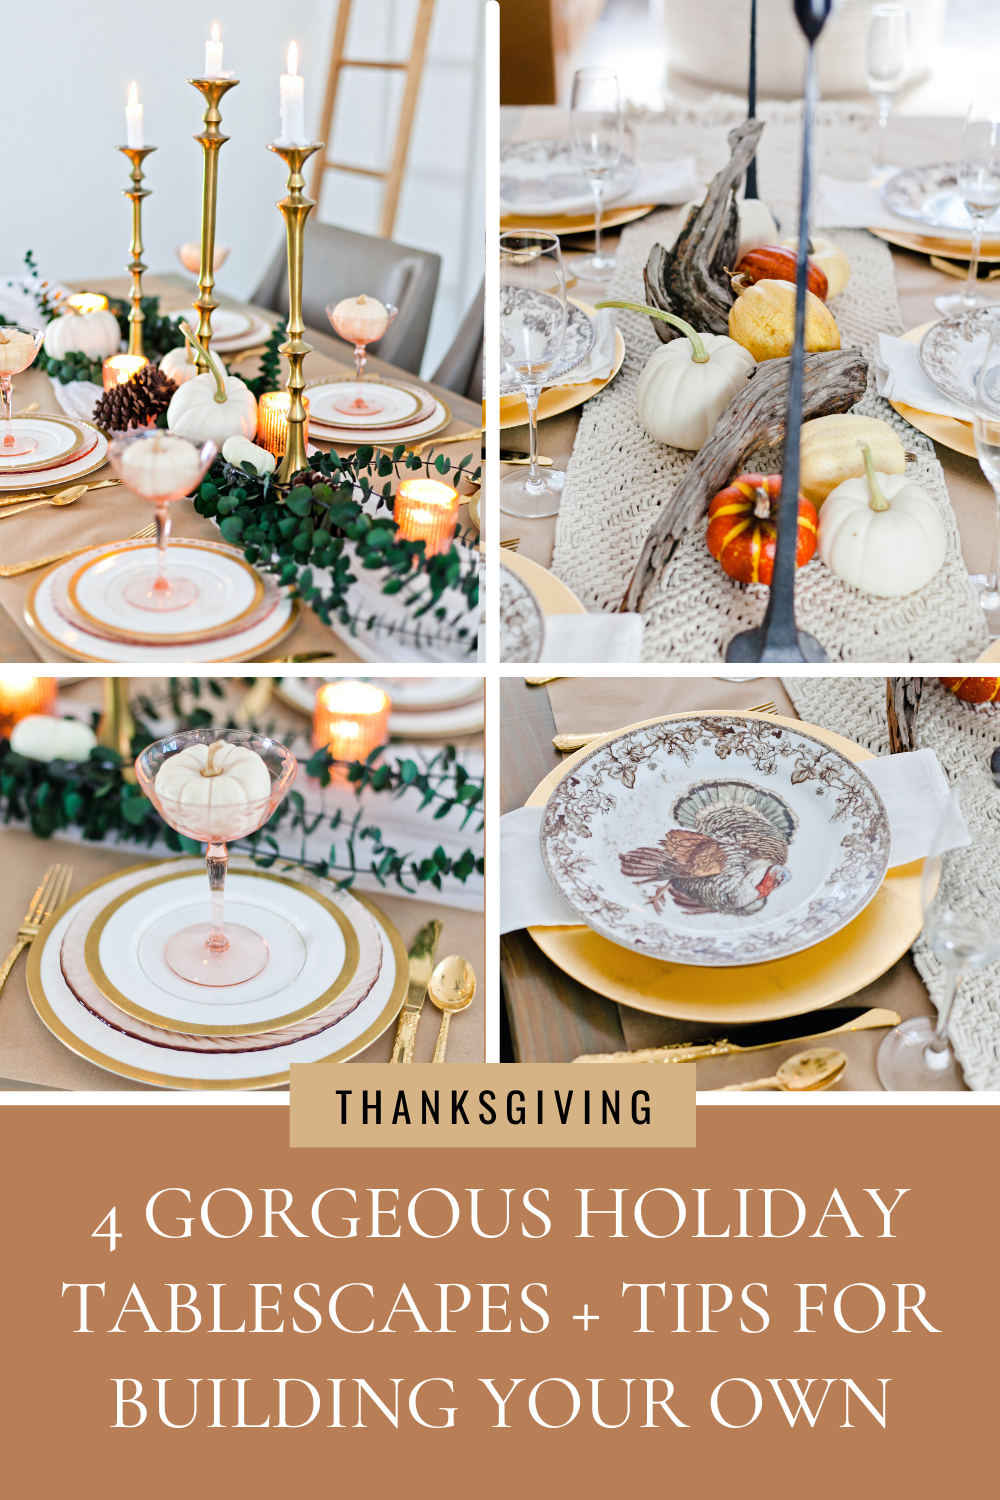 4 tips for building a beautiful holiday tablescape. Seasonal table decor inspiration.